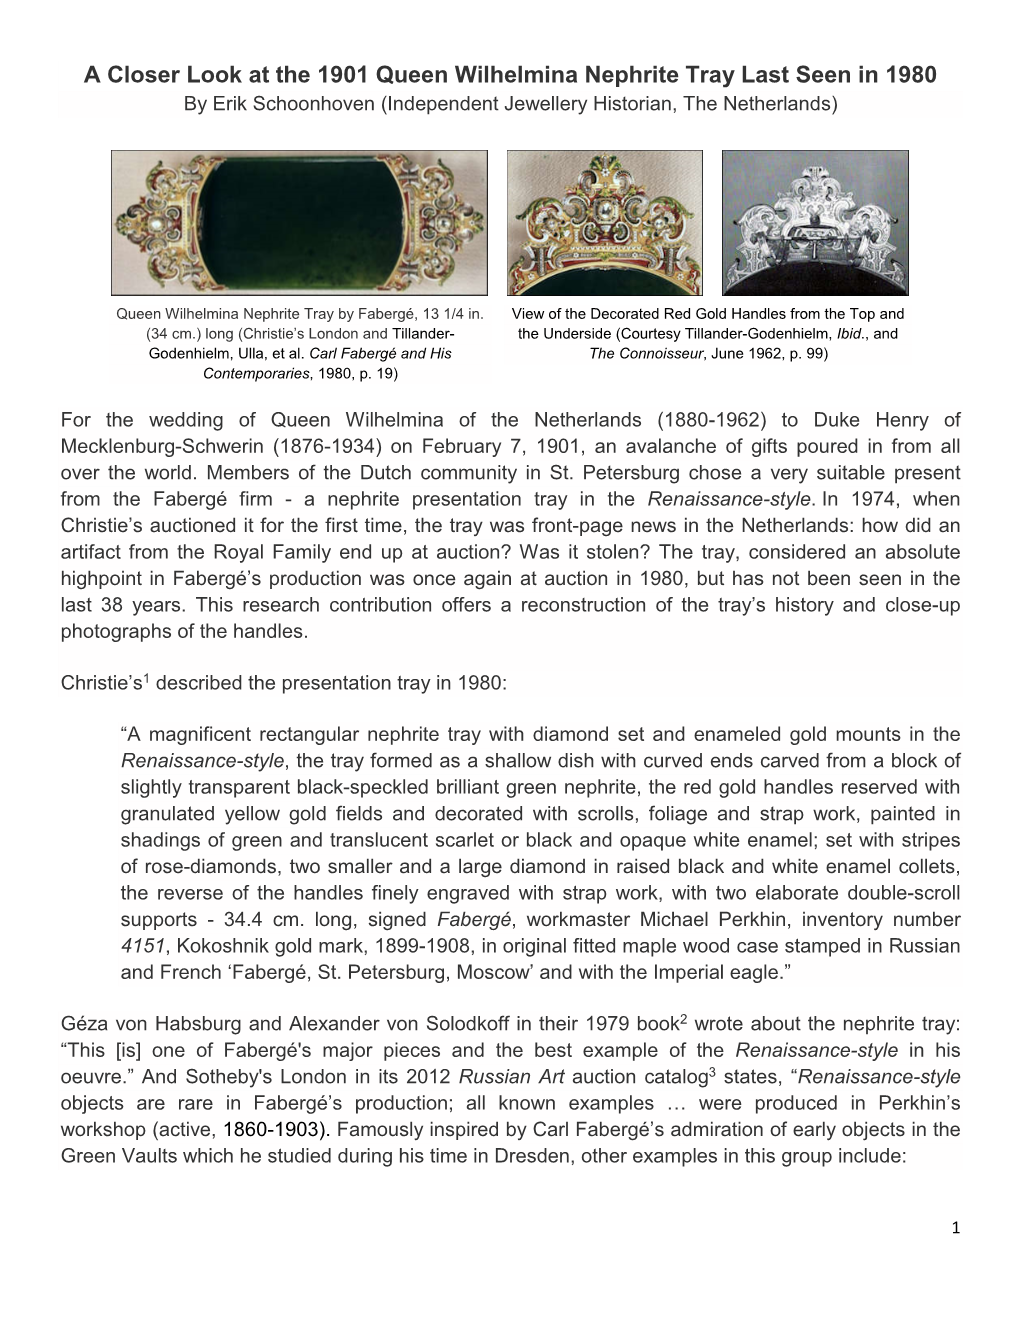 A Closer Look at the 1901 Queen Wilhelmina Nephrite Tray Last Seen in 1980 by Erik Schoonhoven (Independent Jewellery Historian, the Netherlands)